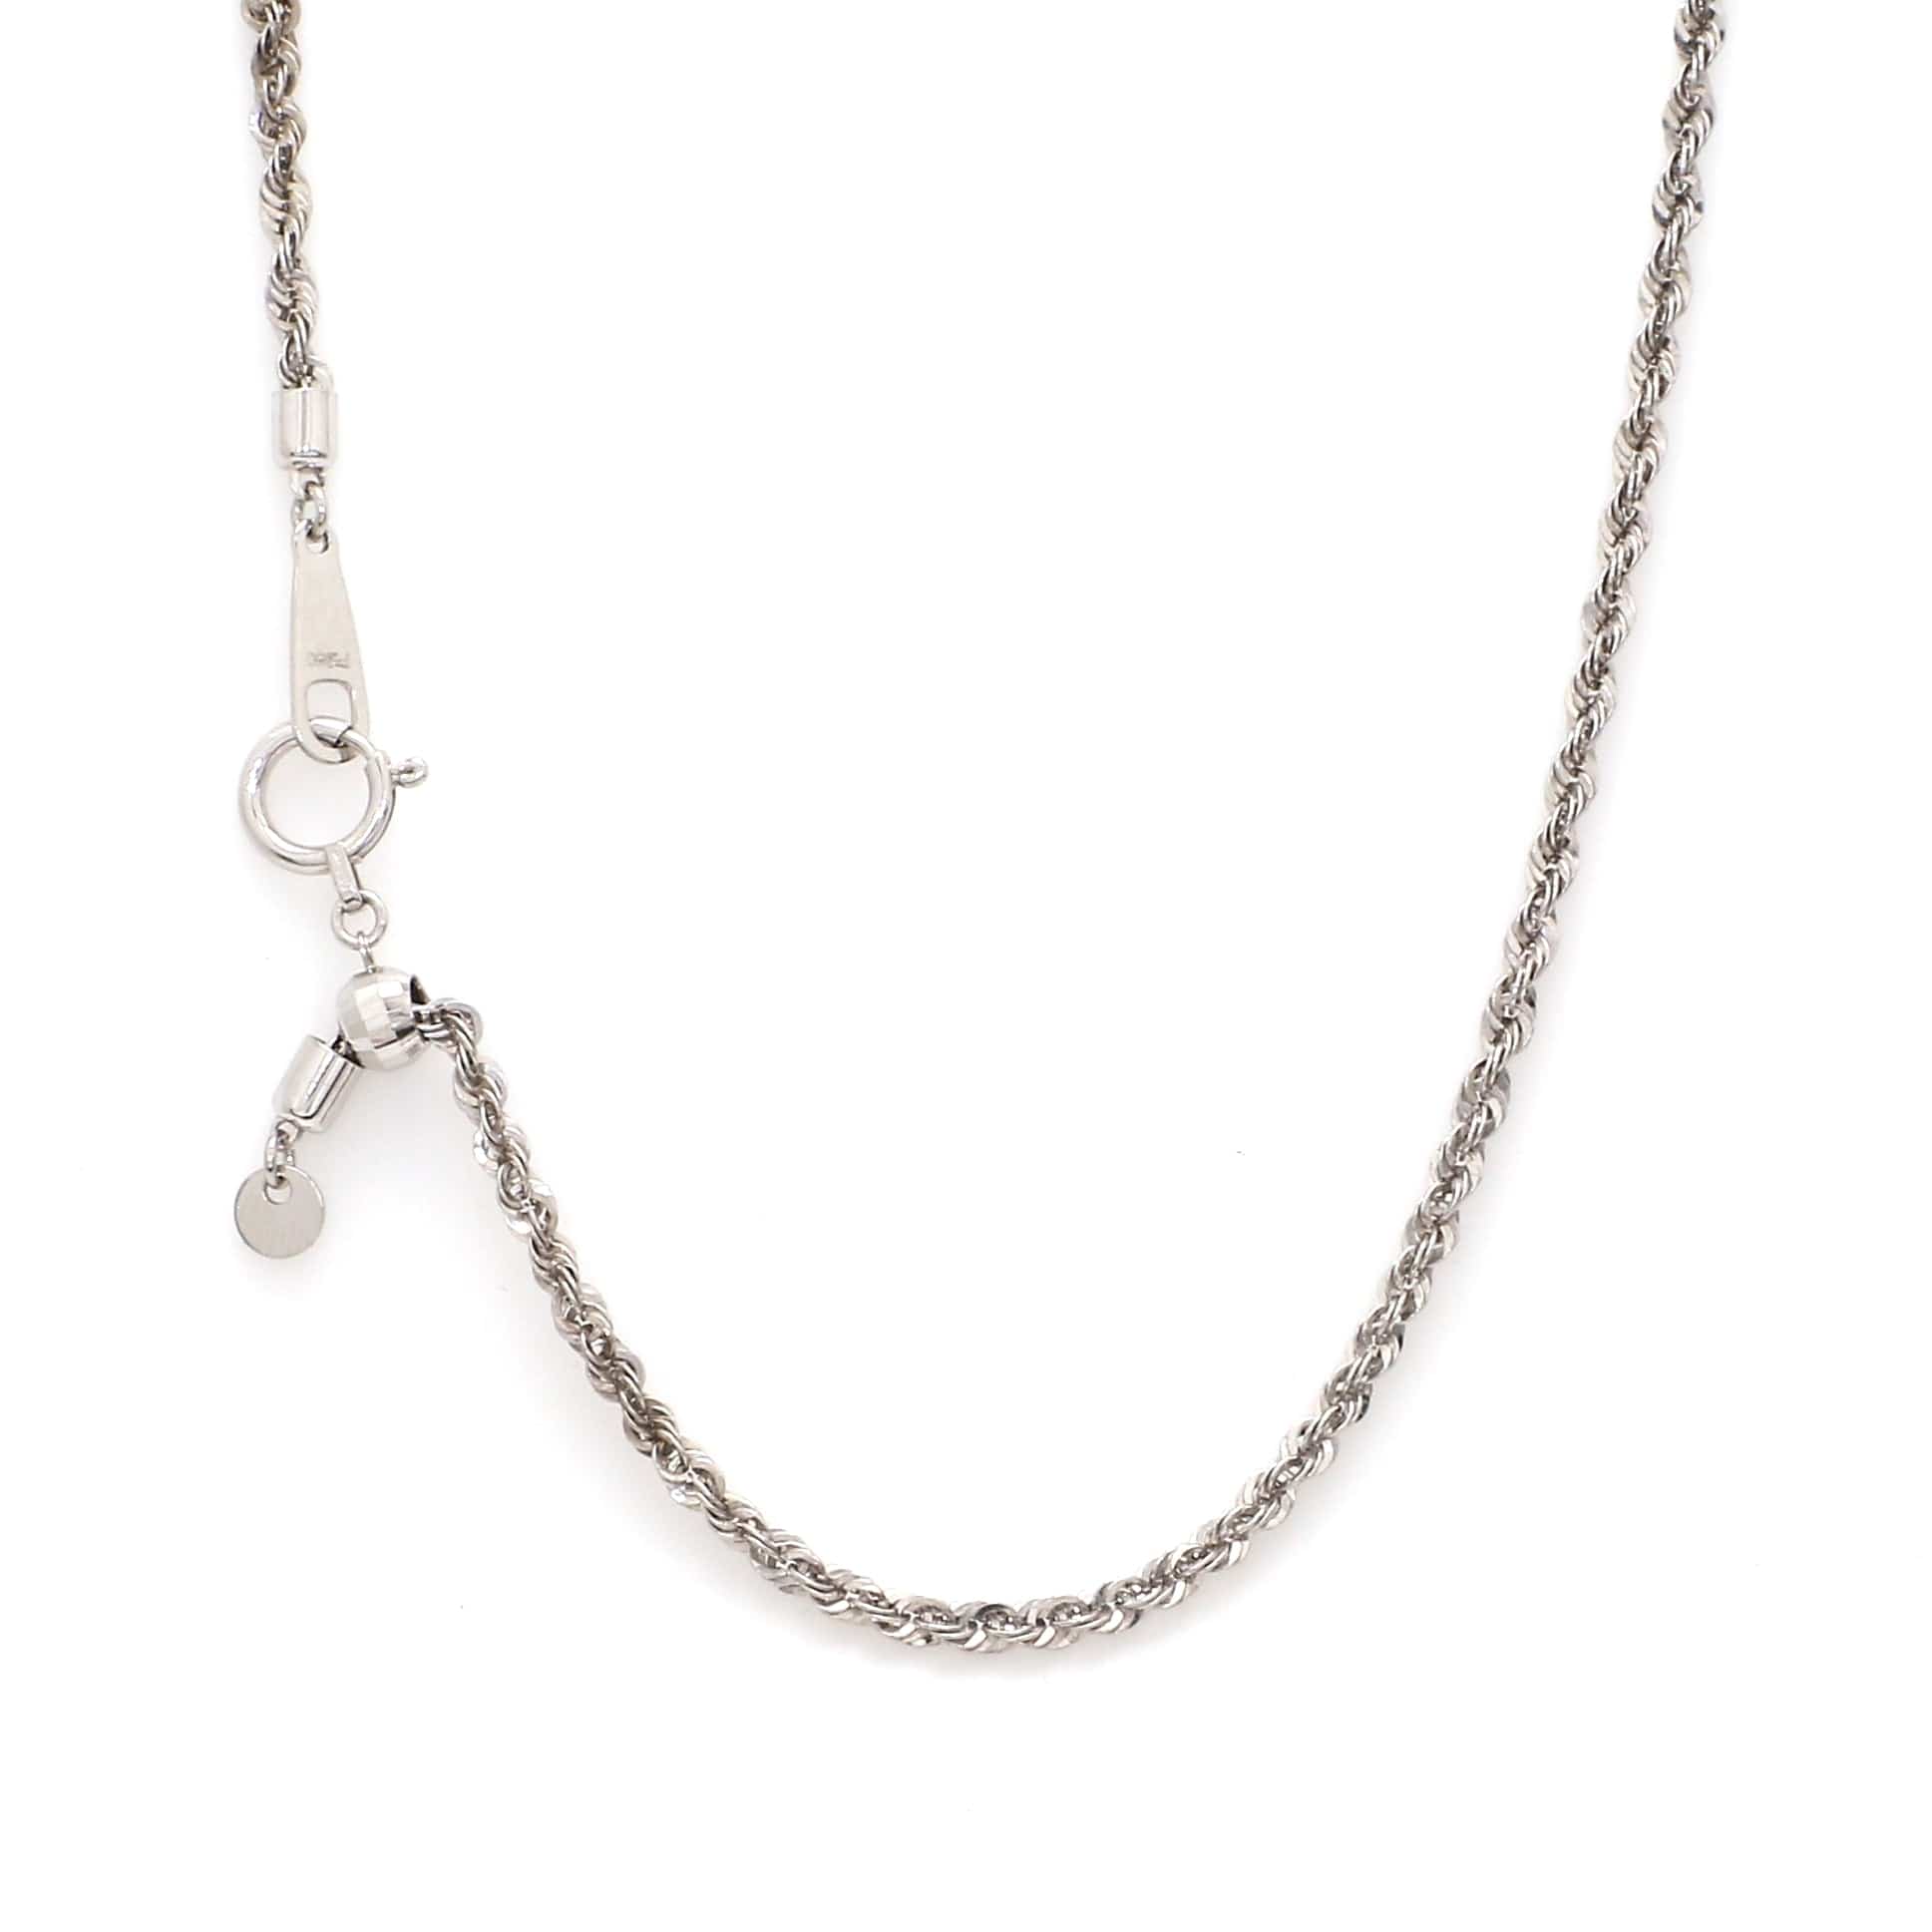 7mm 14kt White Gold Adjustable Box-Chain Necklace | Ross-Simons